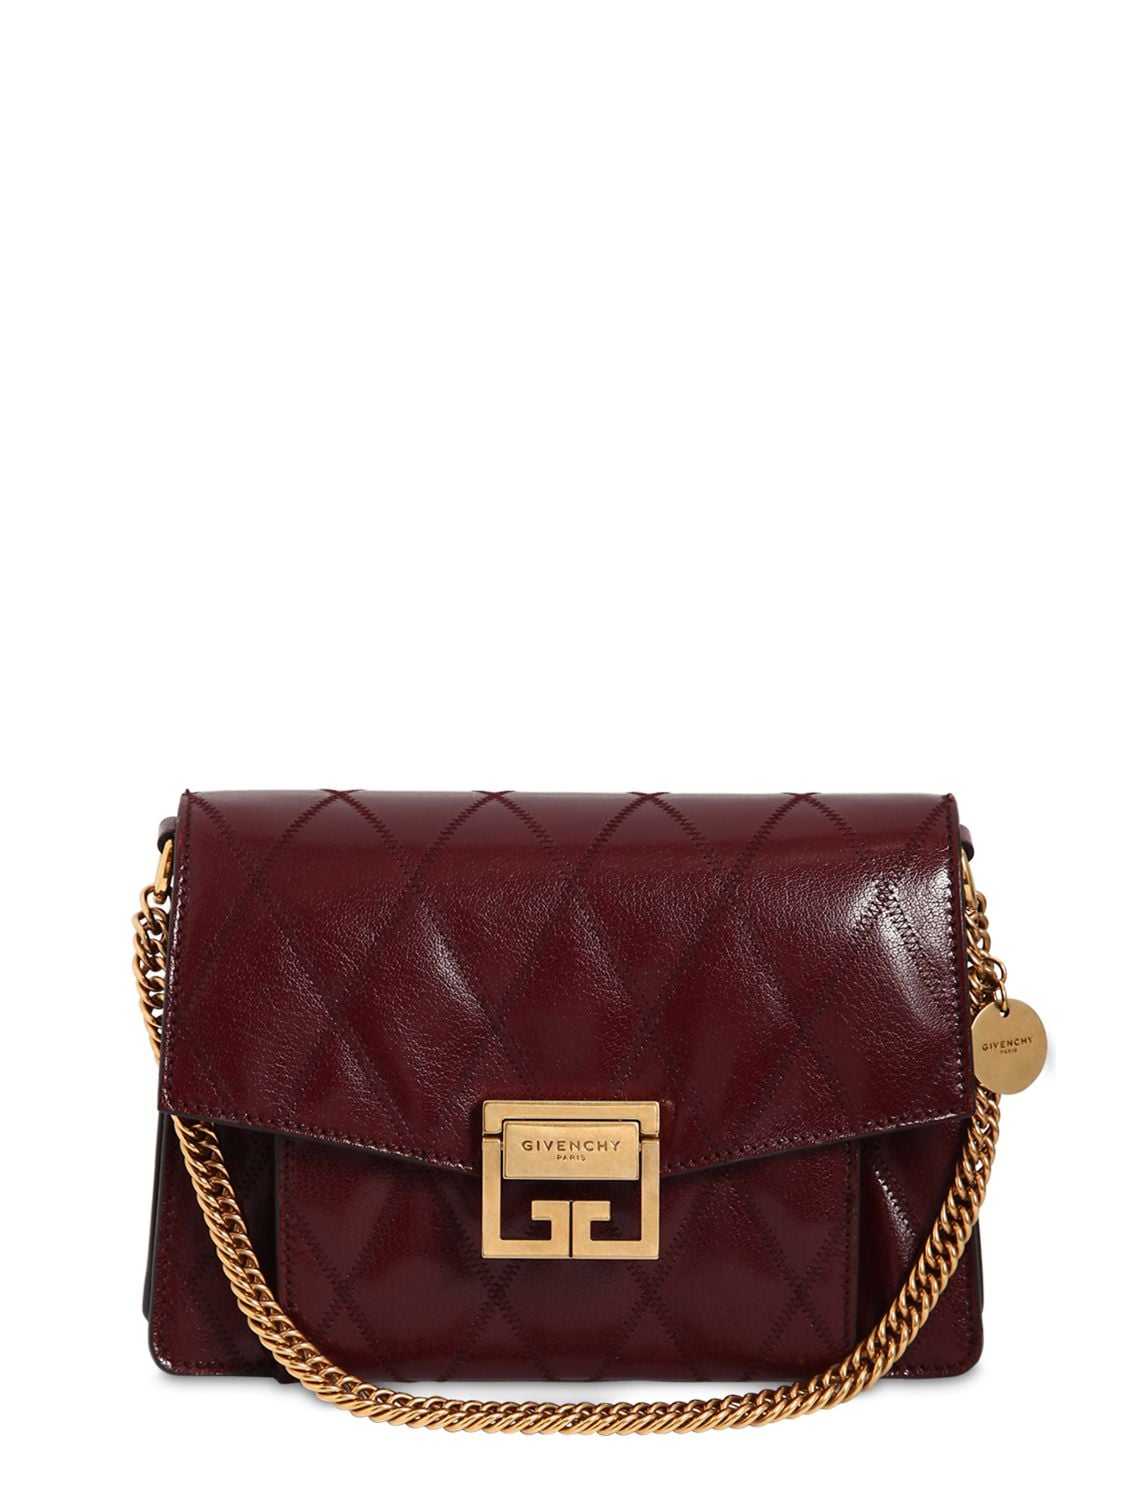 Givenchy Small Gv3 Leather Matelassè Shoulder Bag In Aubergine